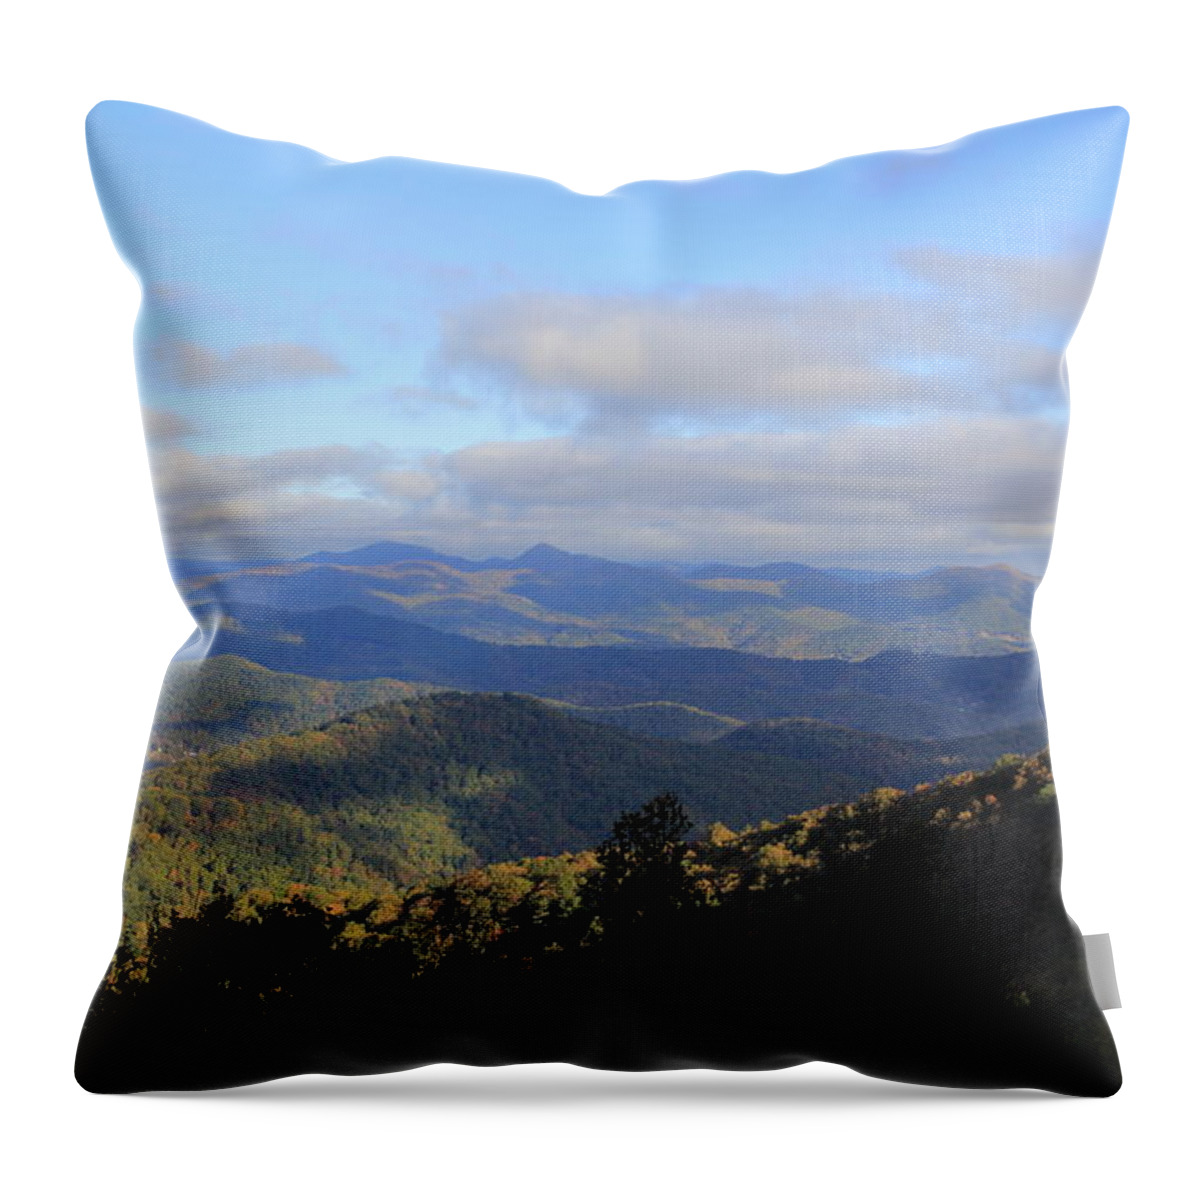 Mountains Throw Pillow featuring the photograph Mountain Landscape 2 by Allen Nice-Webb